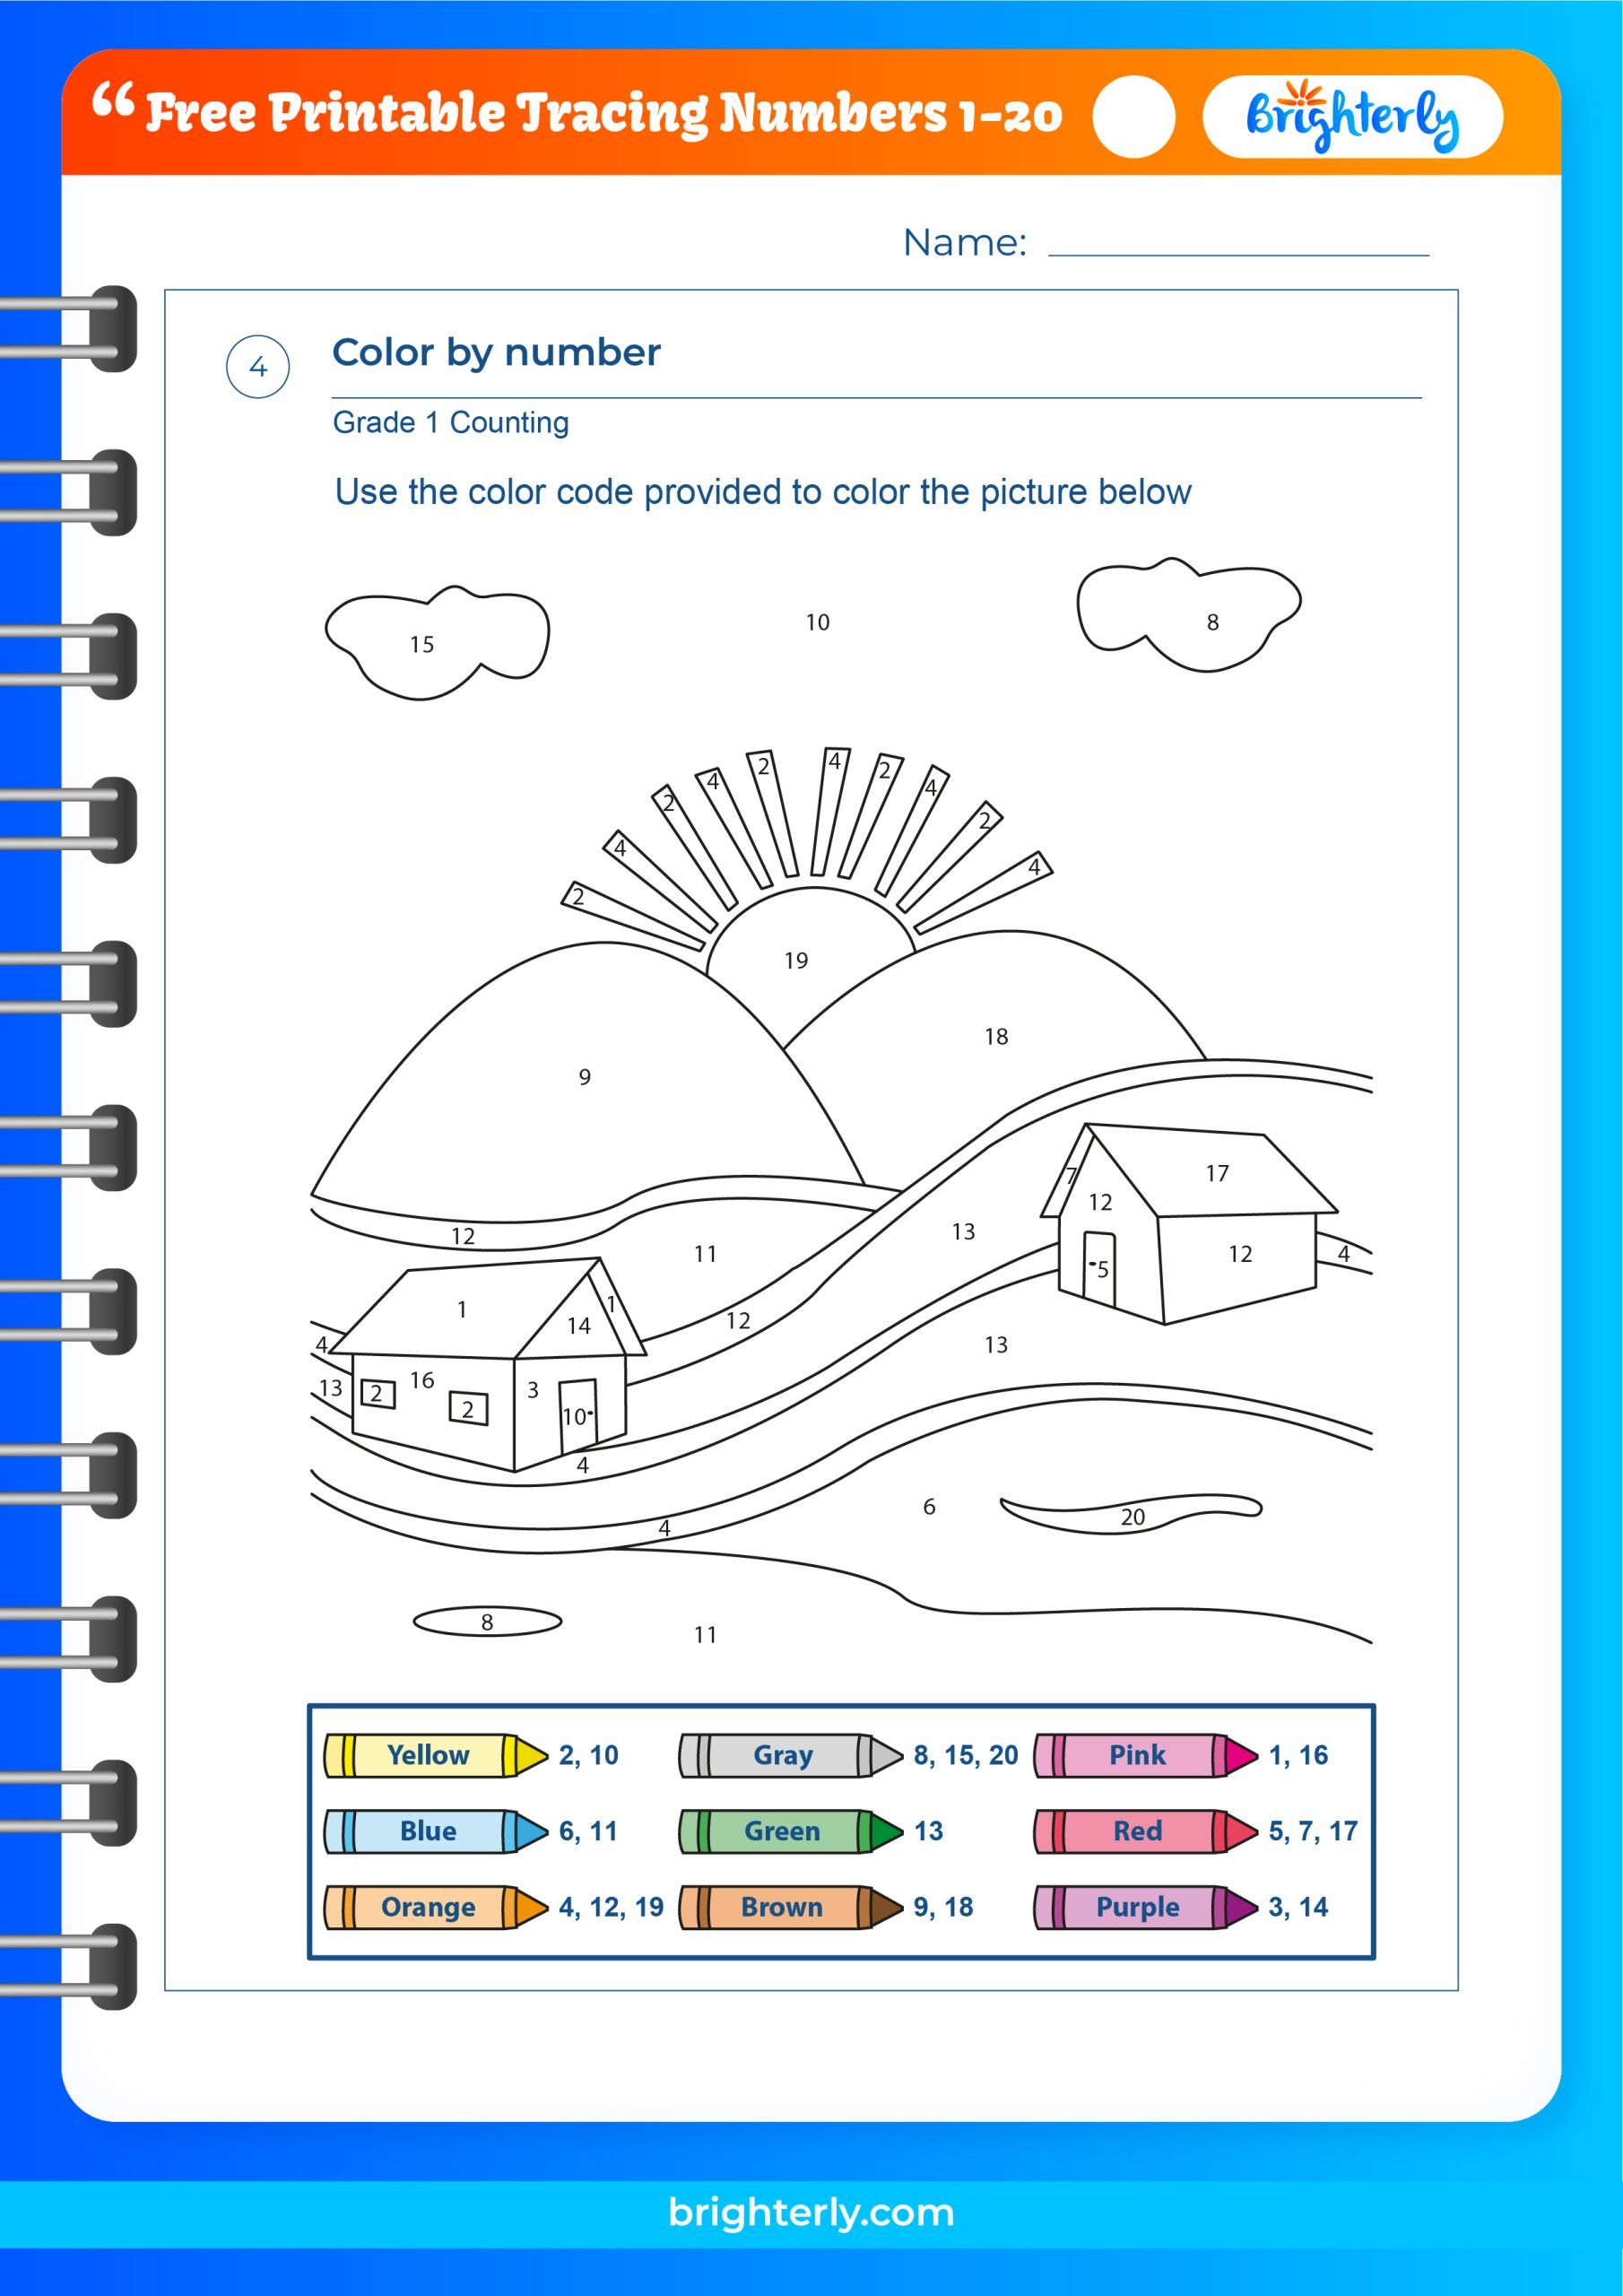 Free Printable Number Tracing Worksheets 1 to 20 PDFs Brighterly